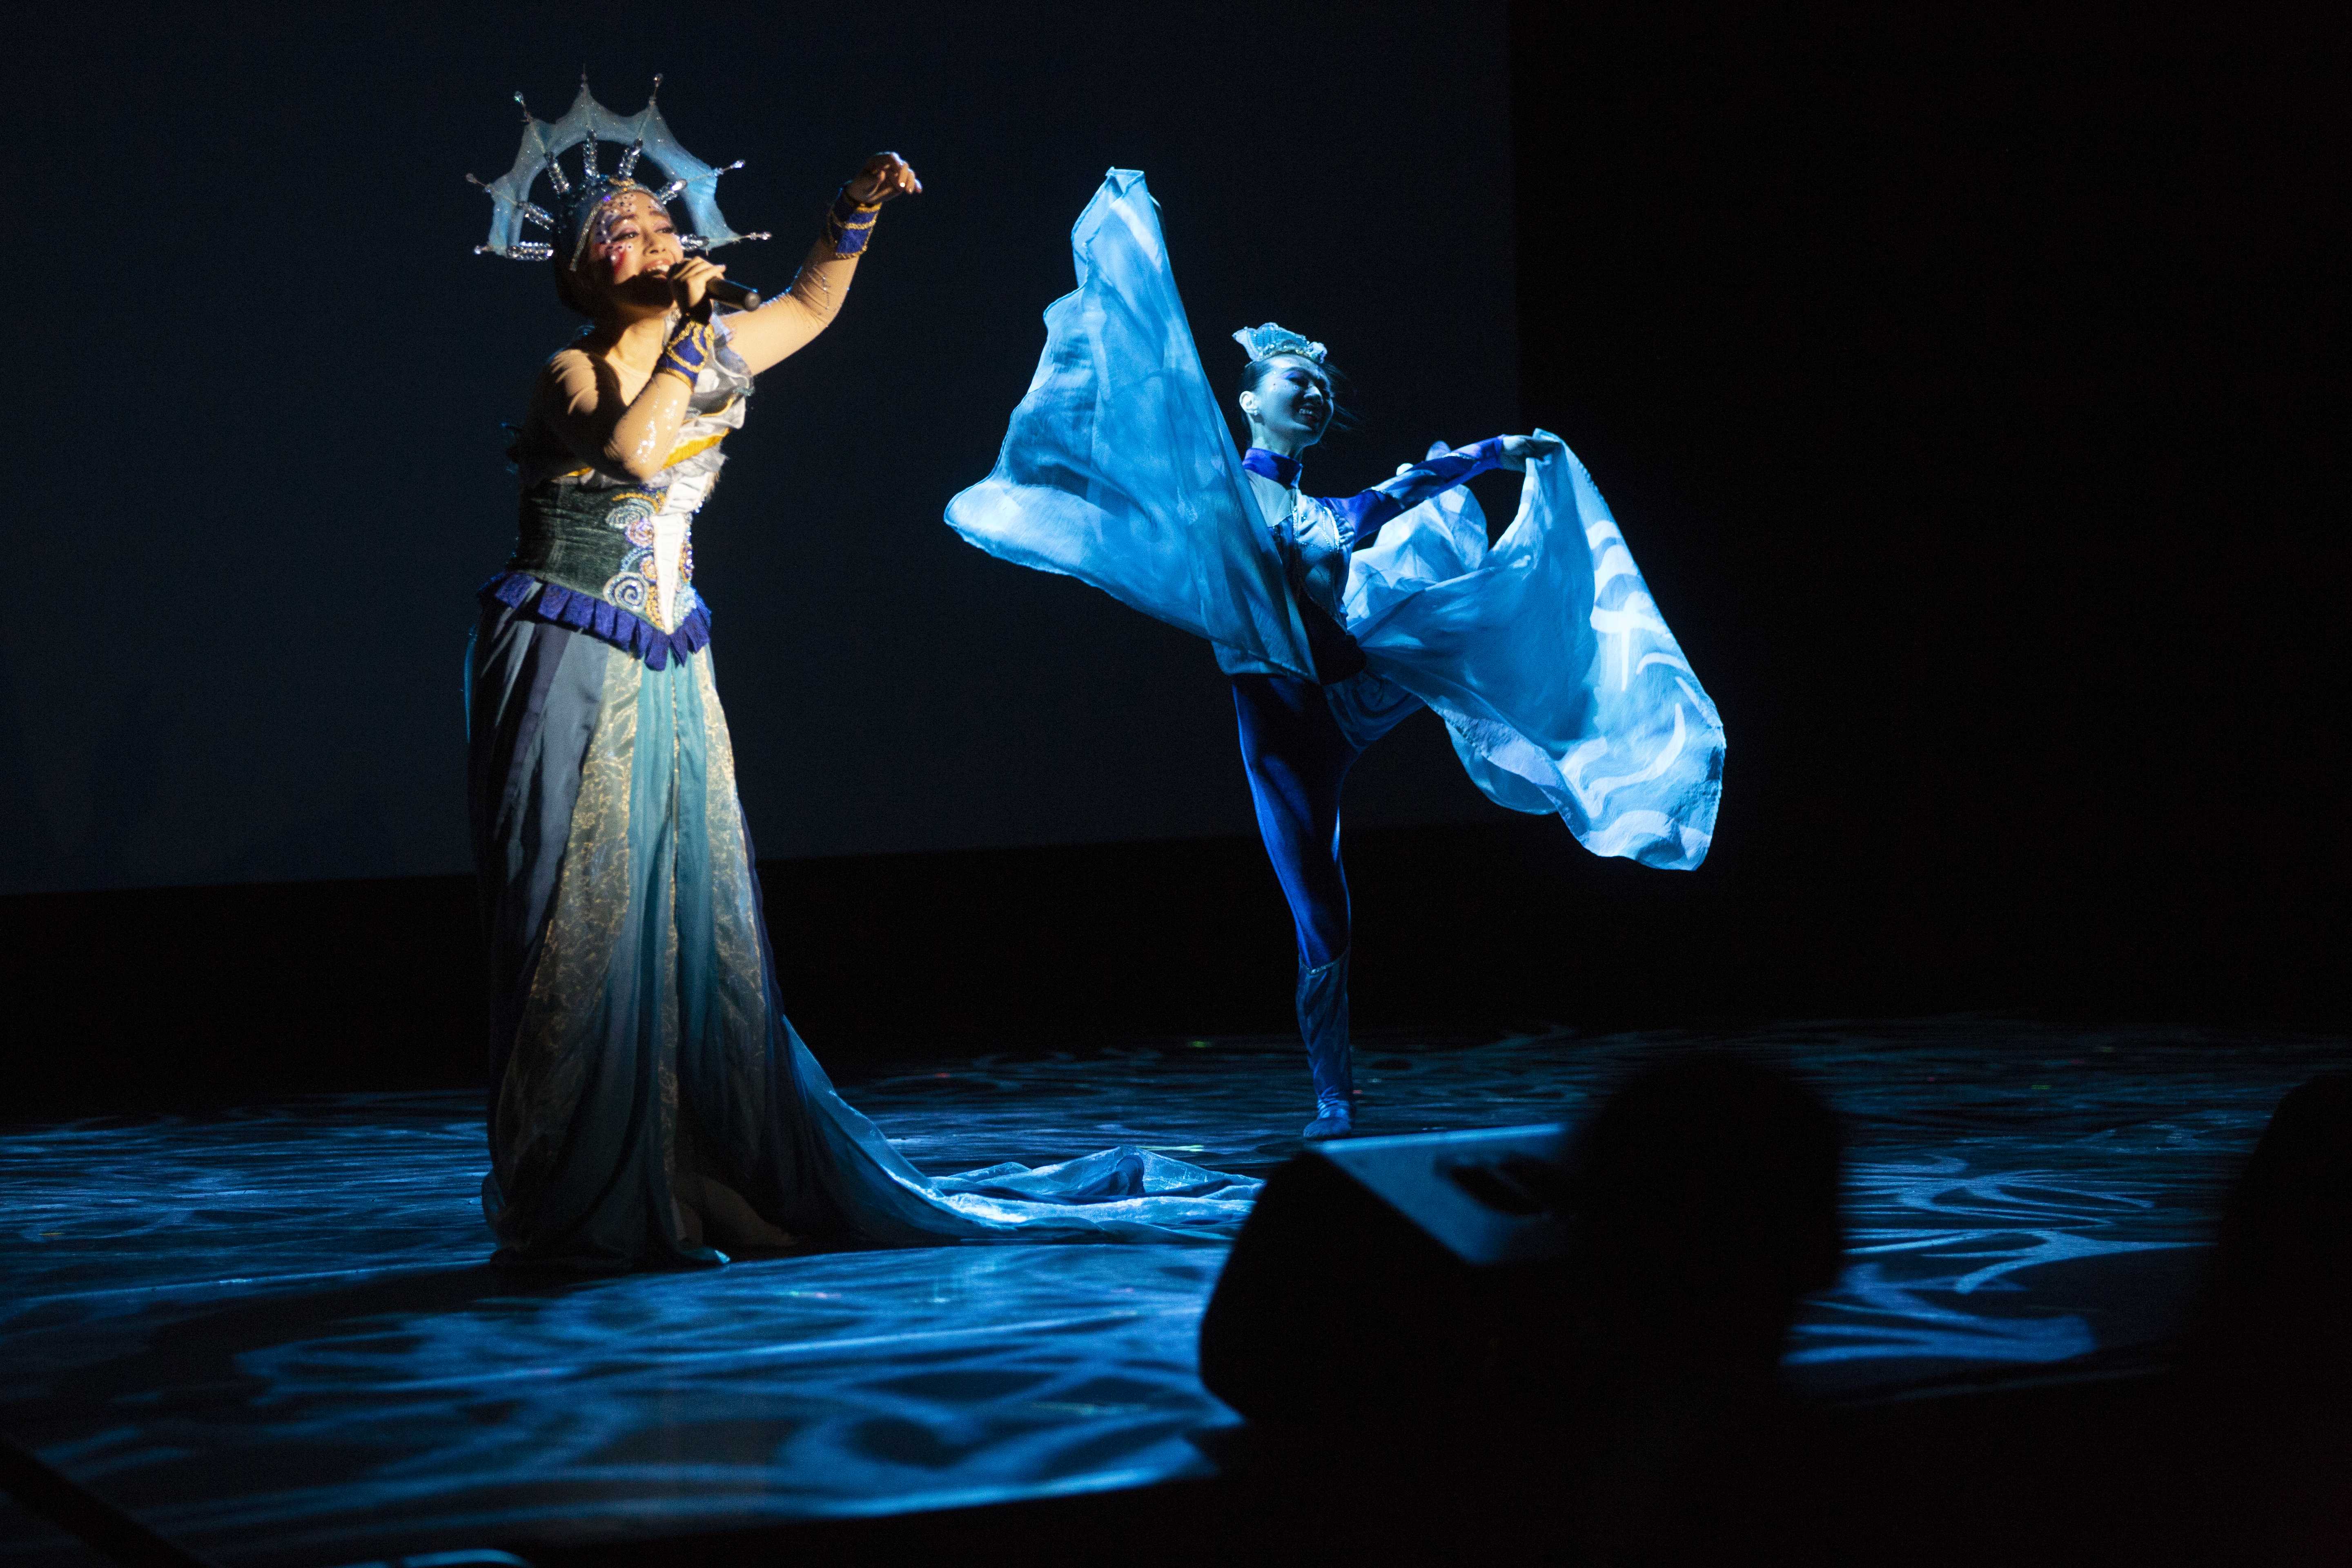 Singer Usay Kawlu and ballerina Lin yi Jiun perform a song and dance number during the first act of the “Ocean Celebration” put on by the Diabolo Dance Theatre at the Satellite Student Union on Friday, Sept. 13, 2019. (Larry Valenzuela/ The Collegian)